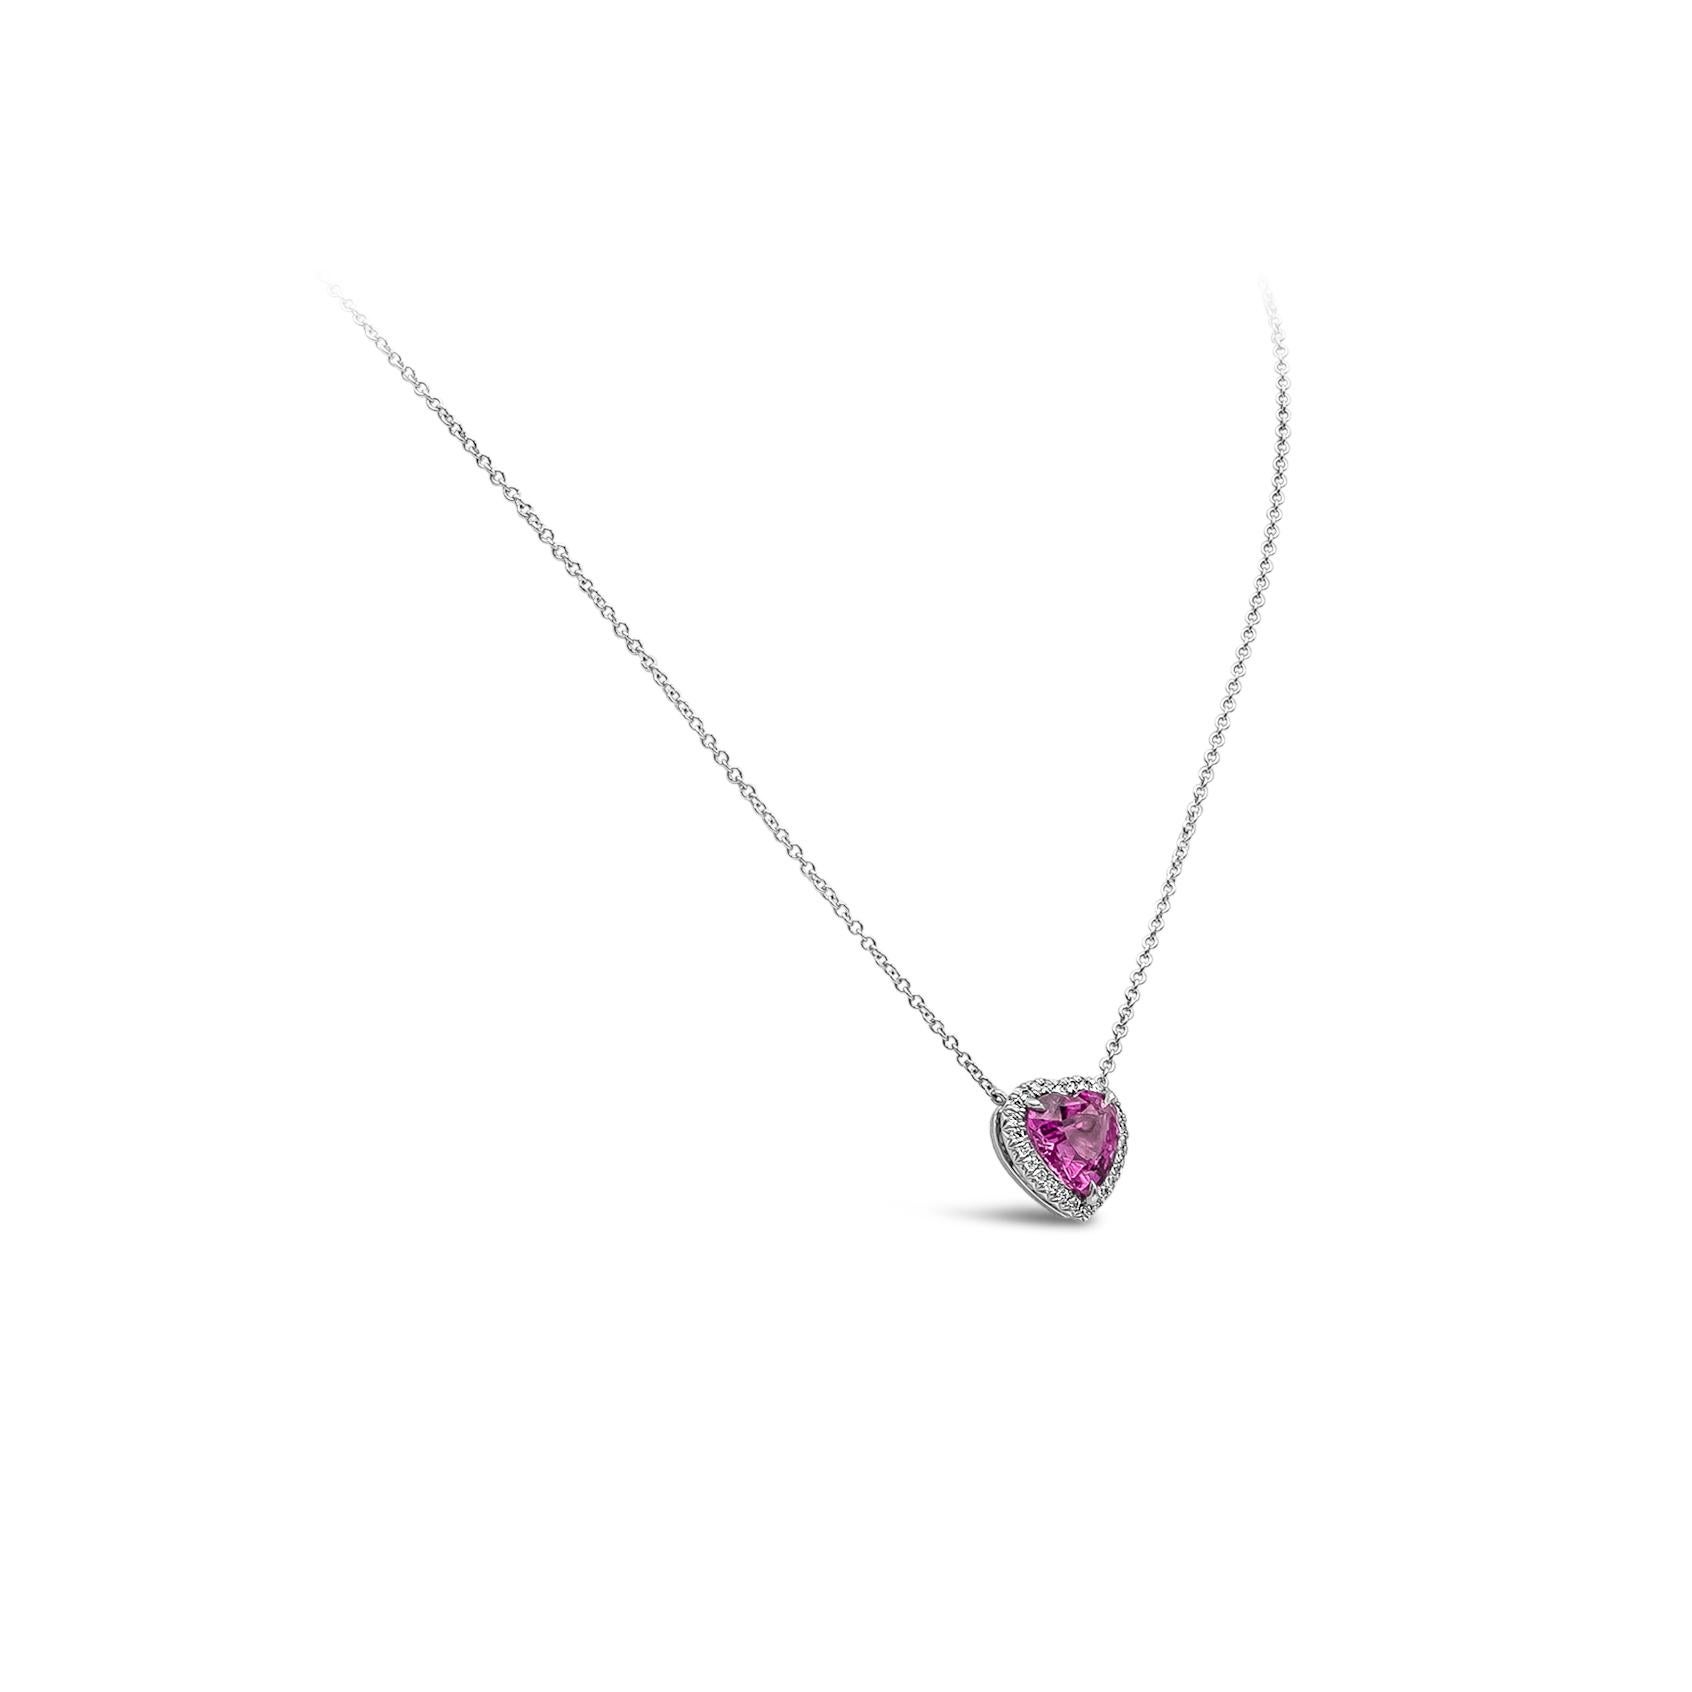 Contemporary C. Dunaigre Certified Heart Pink Sapphire and Diamond Halo Pendant Necklace